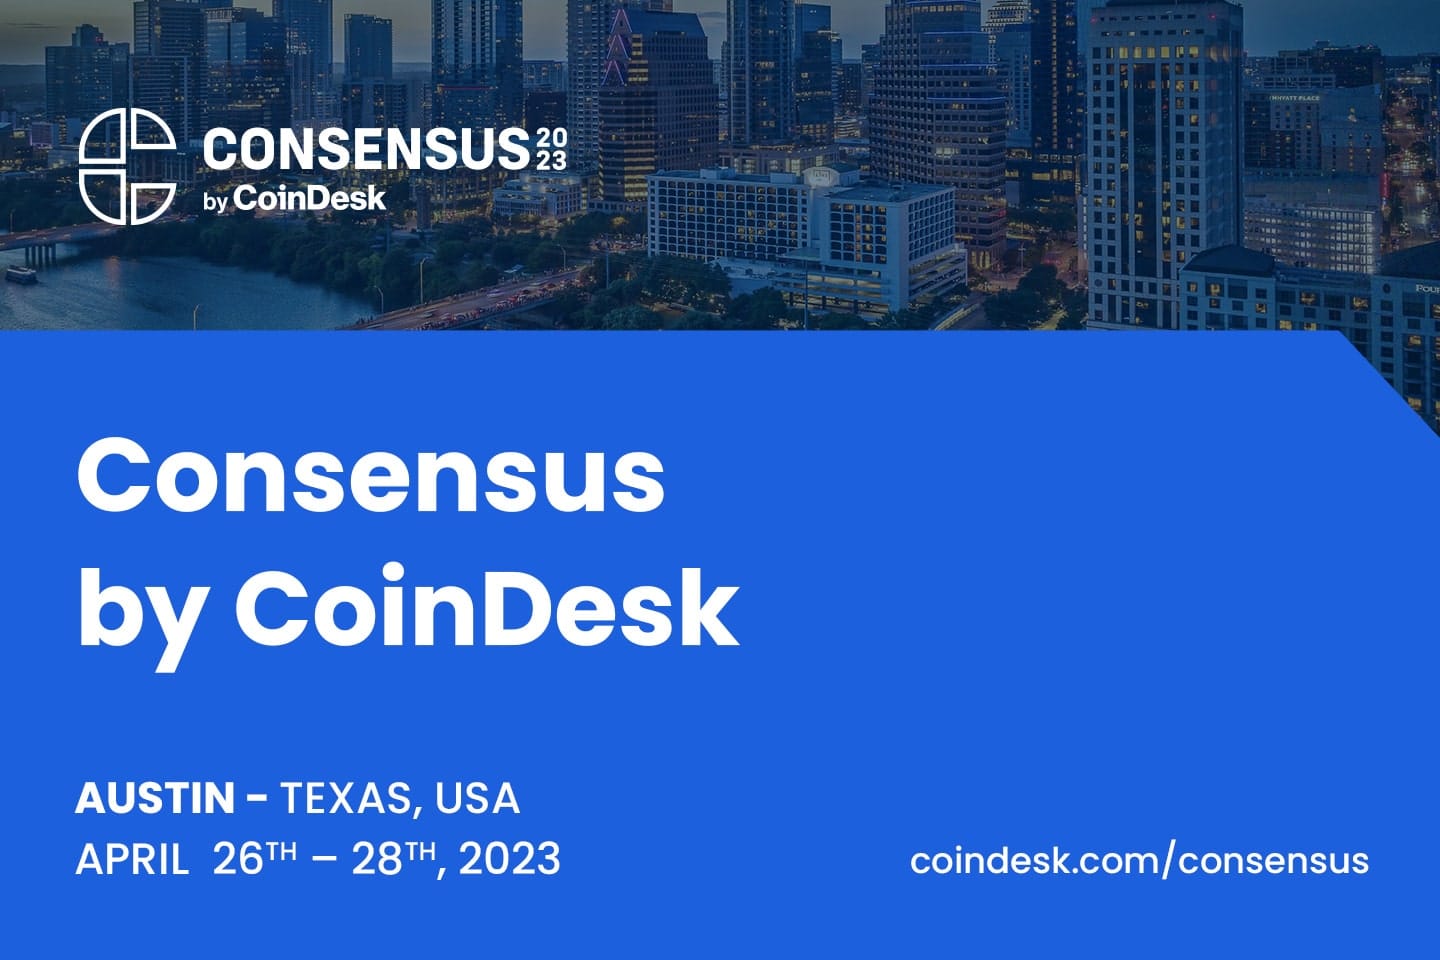 coindesk consensus